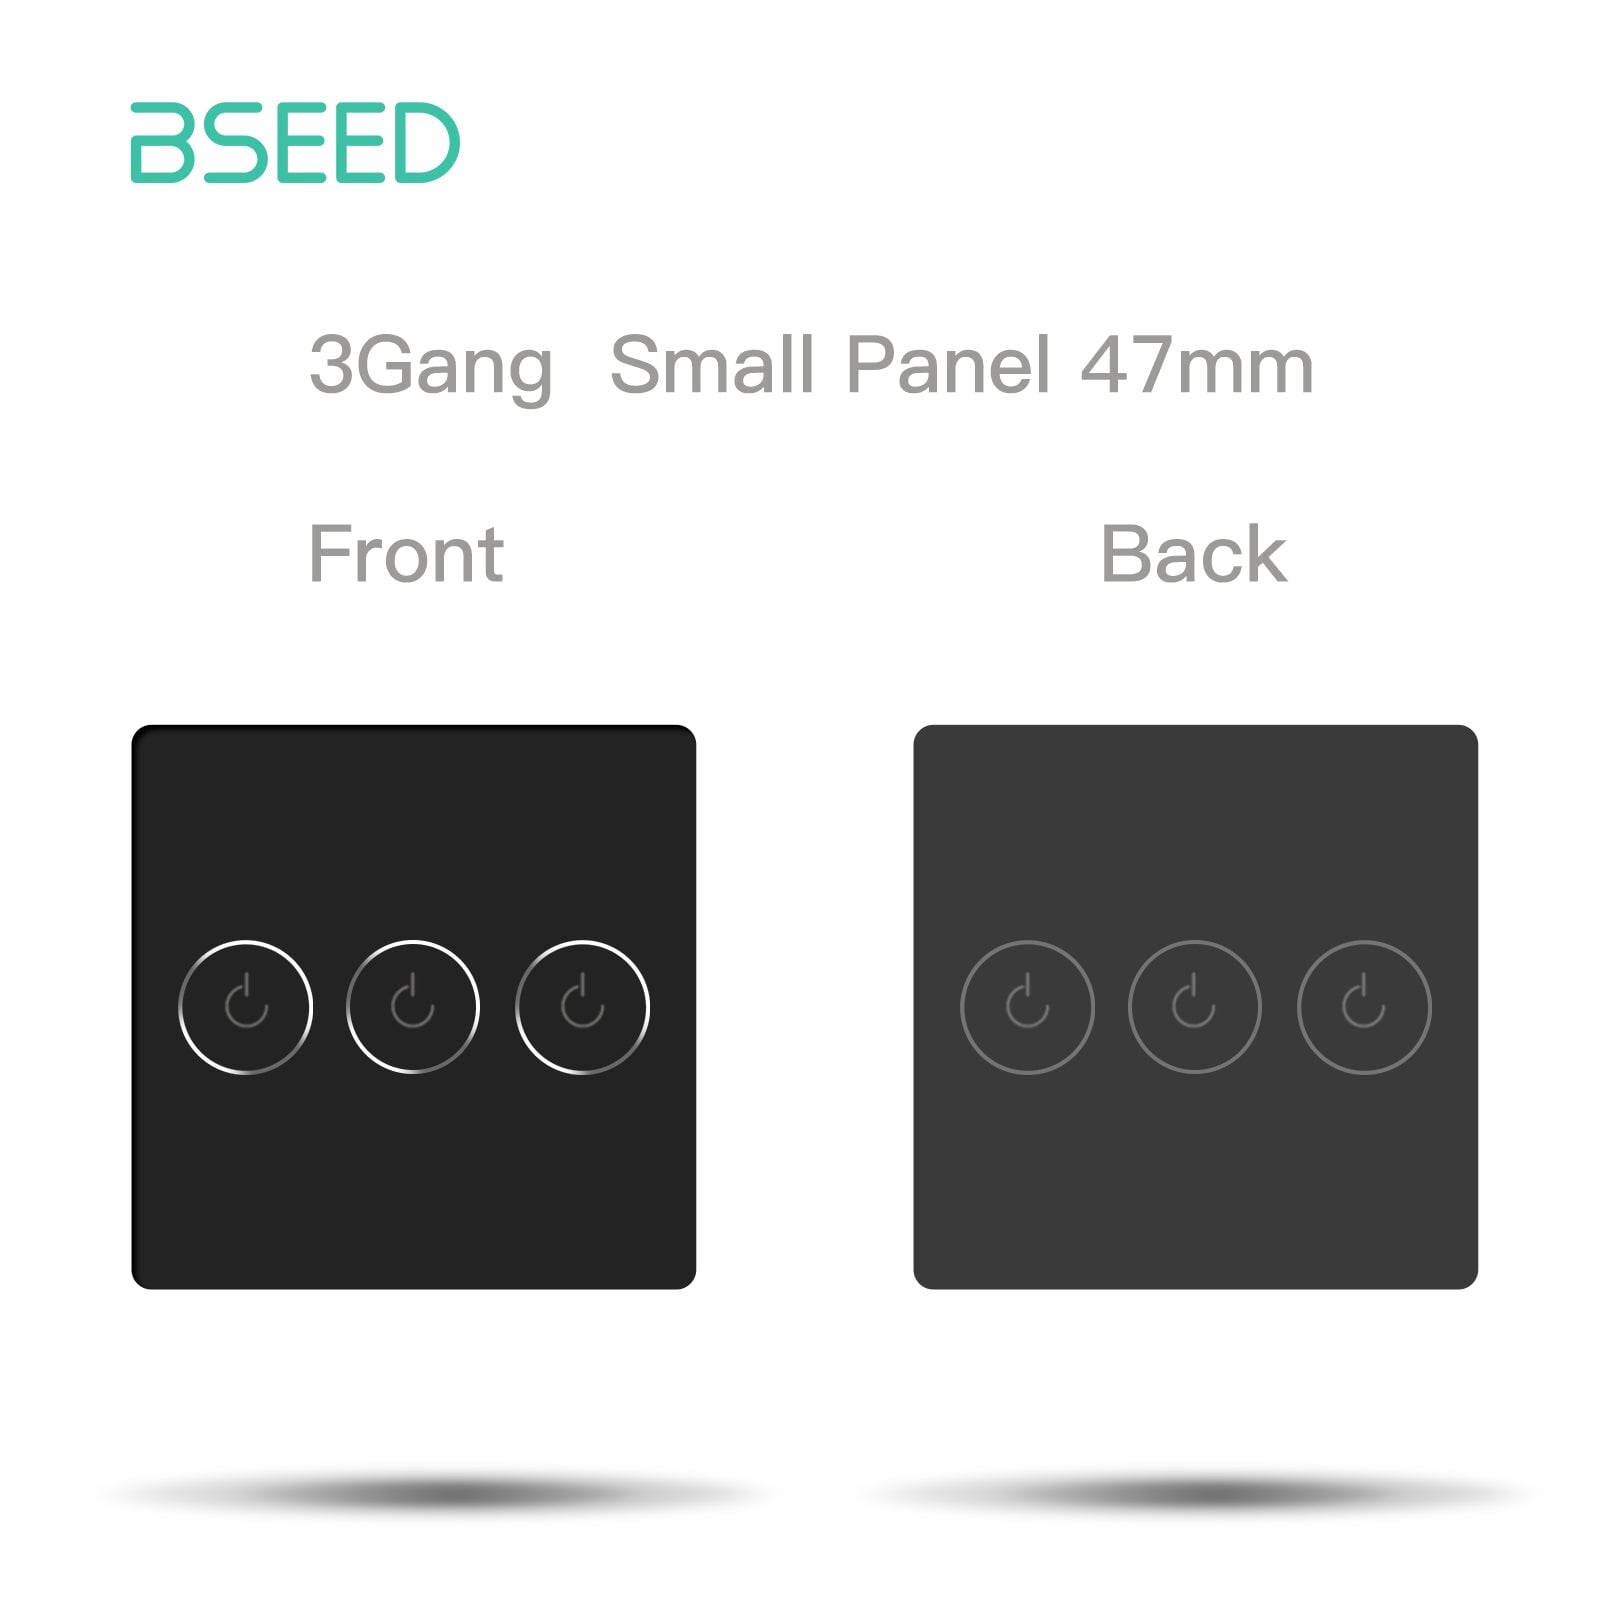 Bseed 47mm Glass Panel Switch DIY Part With Or Without Icon Bseedswitch Black Wifi 3Gang Switch icon Panel 